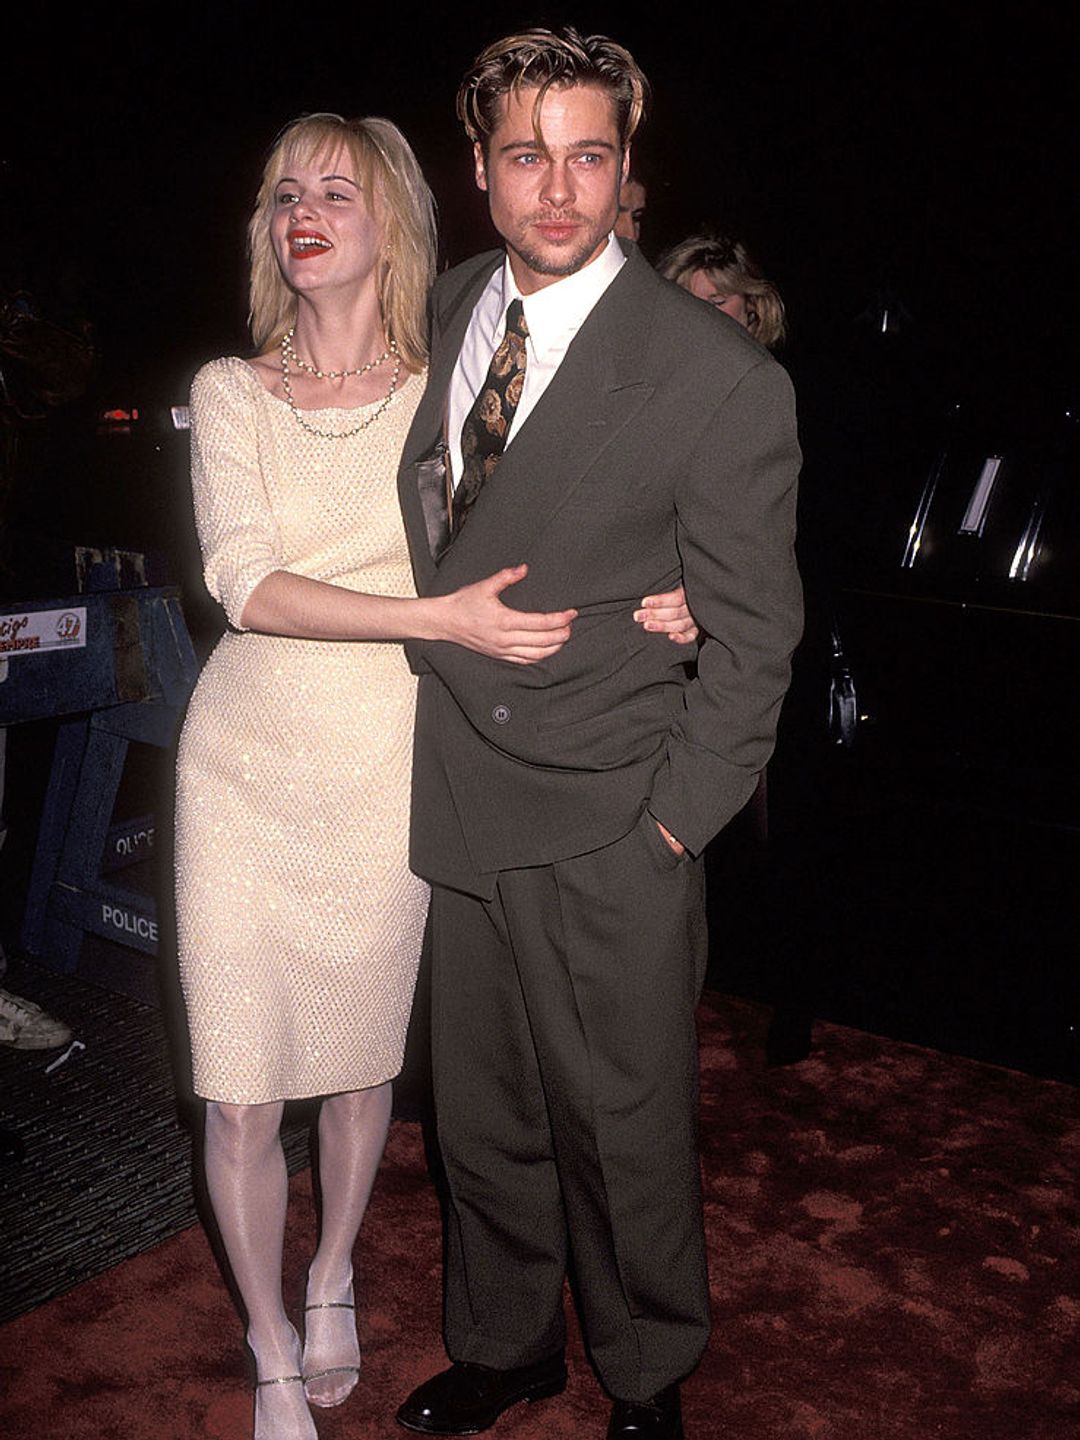 Juliette Lewis cuddling up to Brad Pitt at the Thelma & Louise premiere. She is wearing a gold boat neck dress with shimmering sequins and he is dressed in a grey suit. 